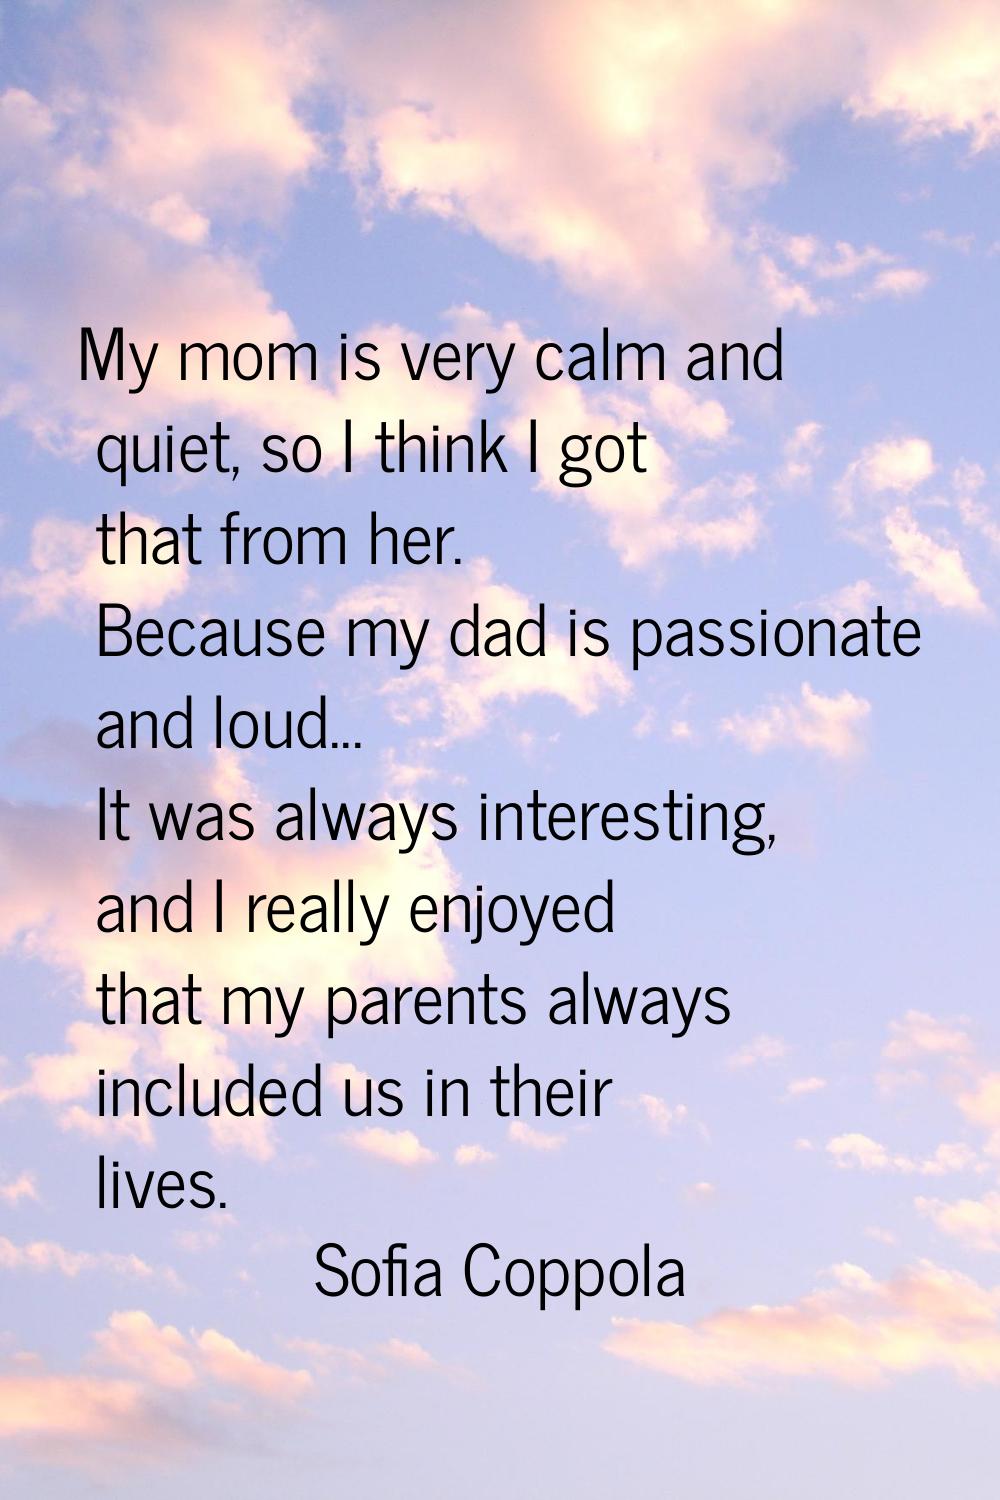 My mom is very calm and quiet, so I think I got that from her. Because my dad is passionate and lou